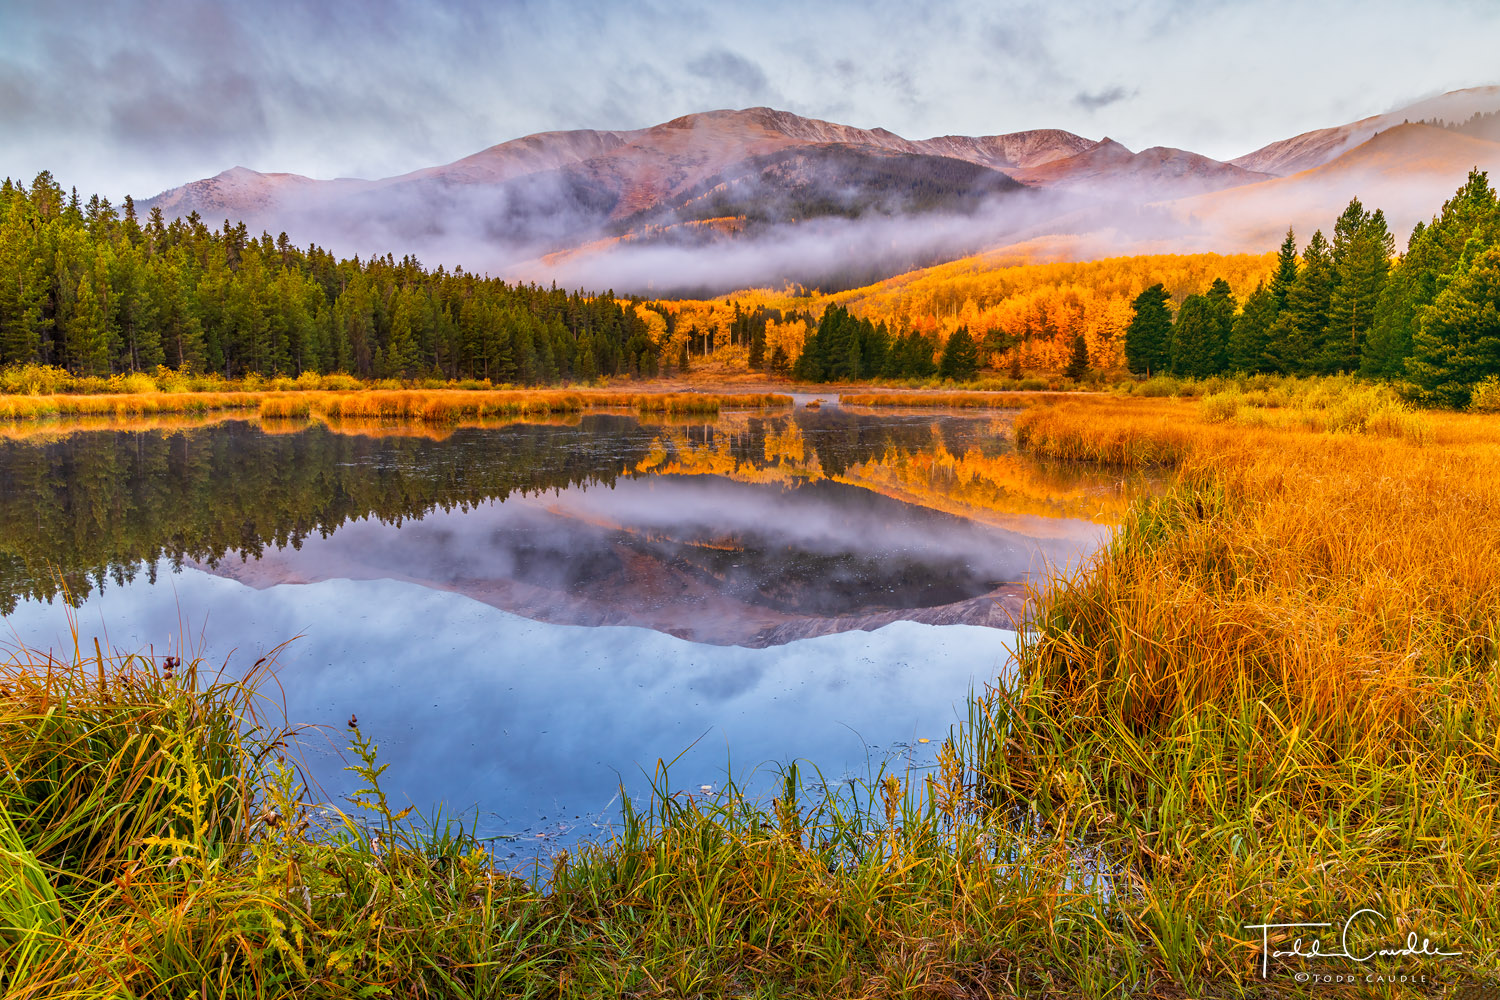 Fog drifts through the forest on the east slopes of the Sawatch Range as a still beaver pond reflects the dynamic scene.